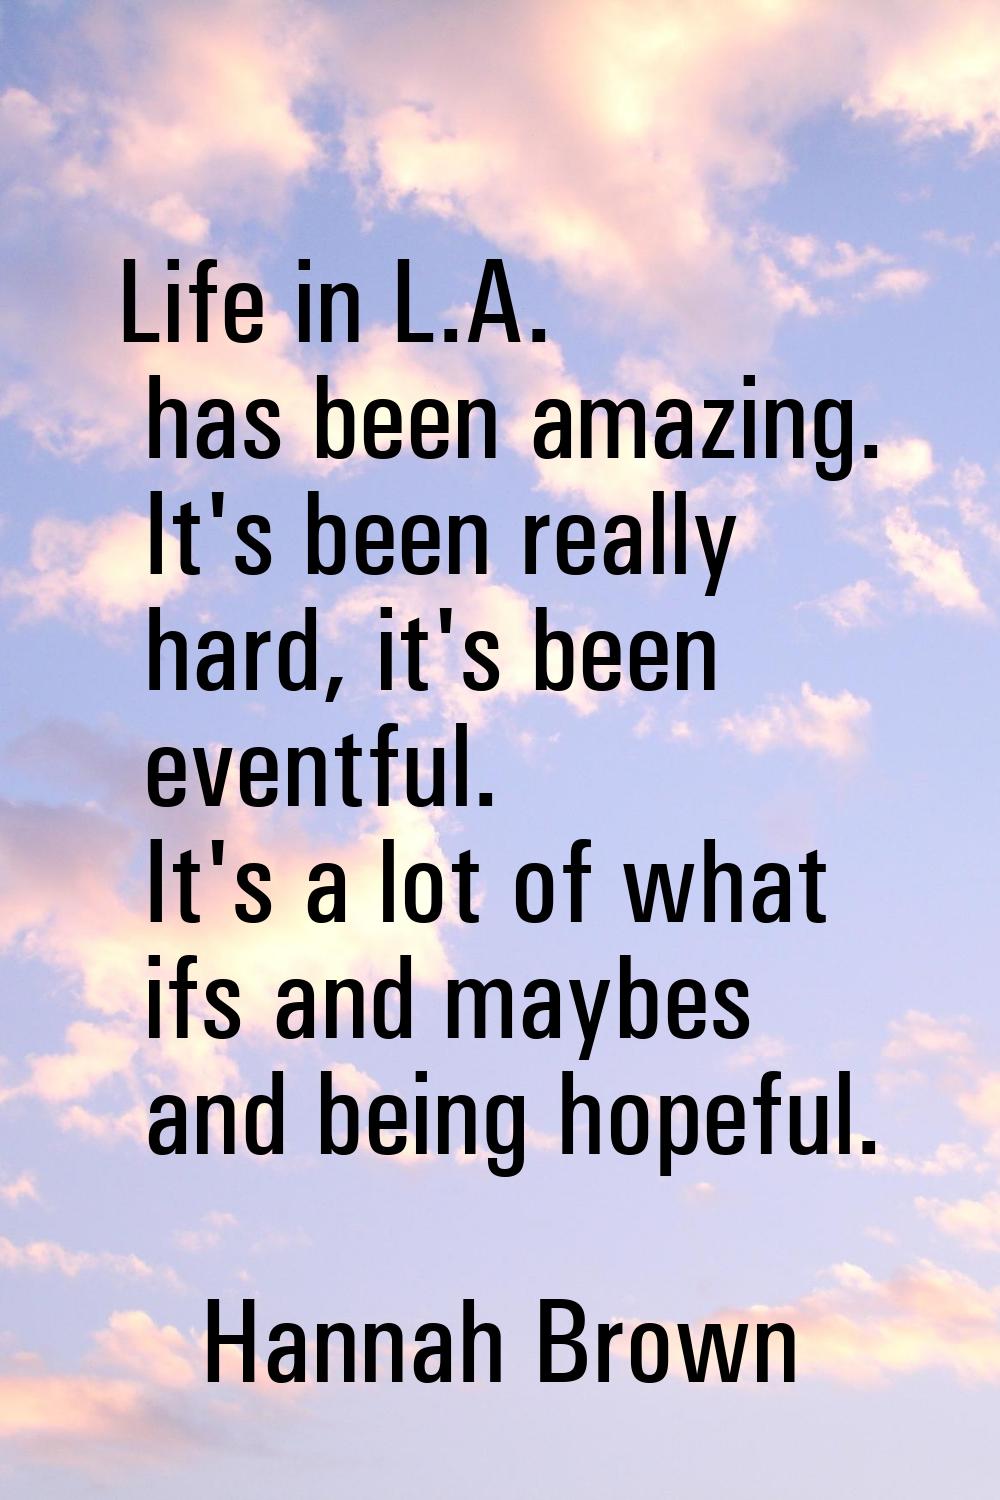 Life in L.A. has been amazing. It's been really hard, it's been eventful. It's a lot of what ifs an